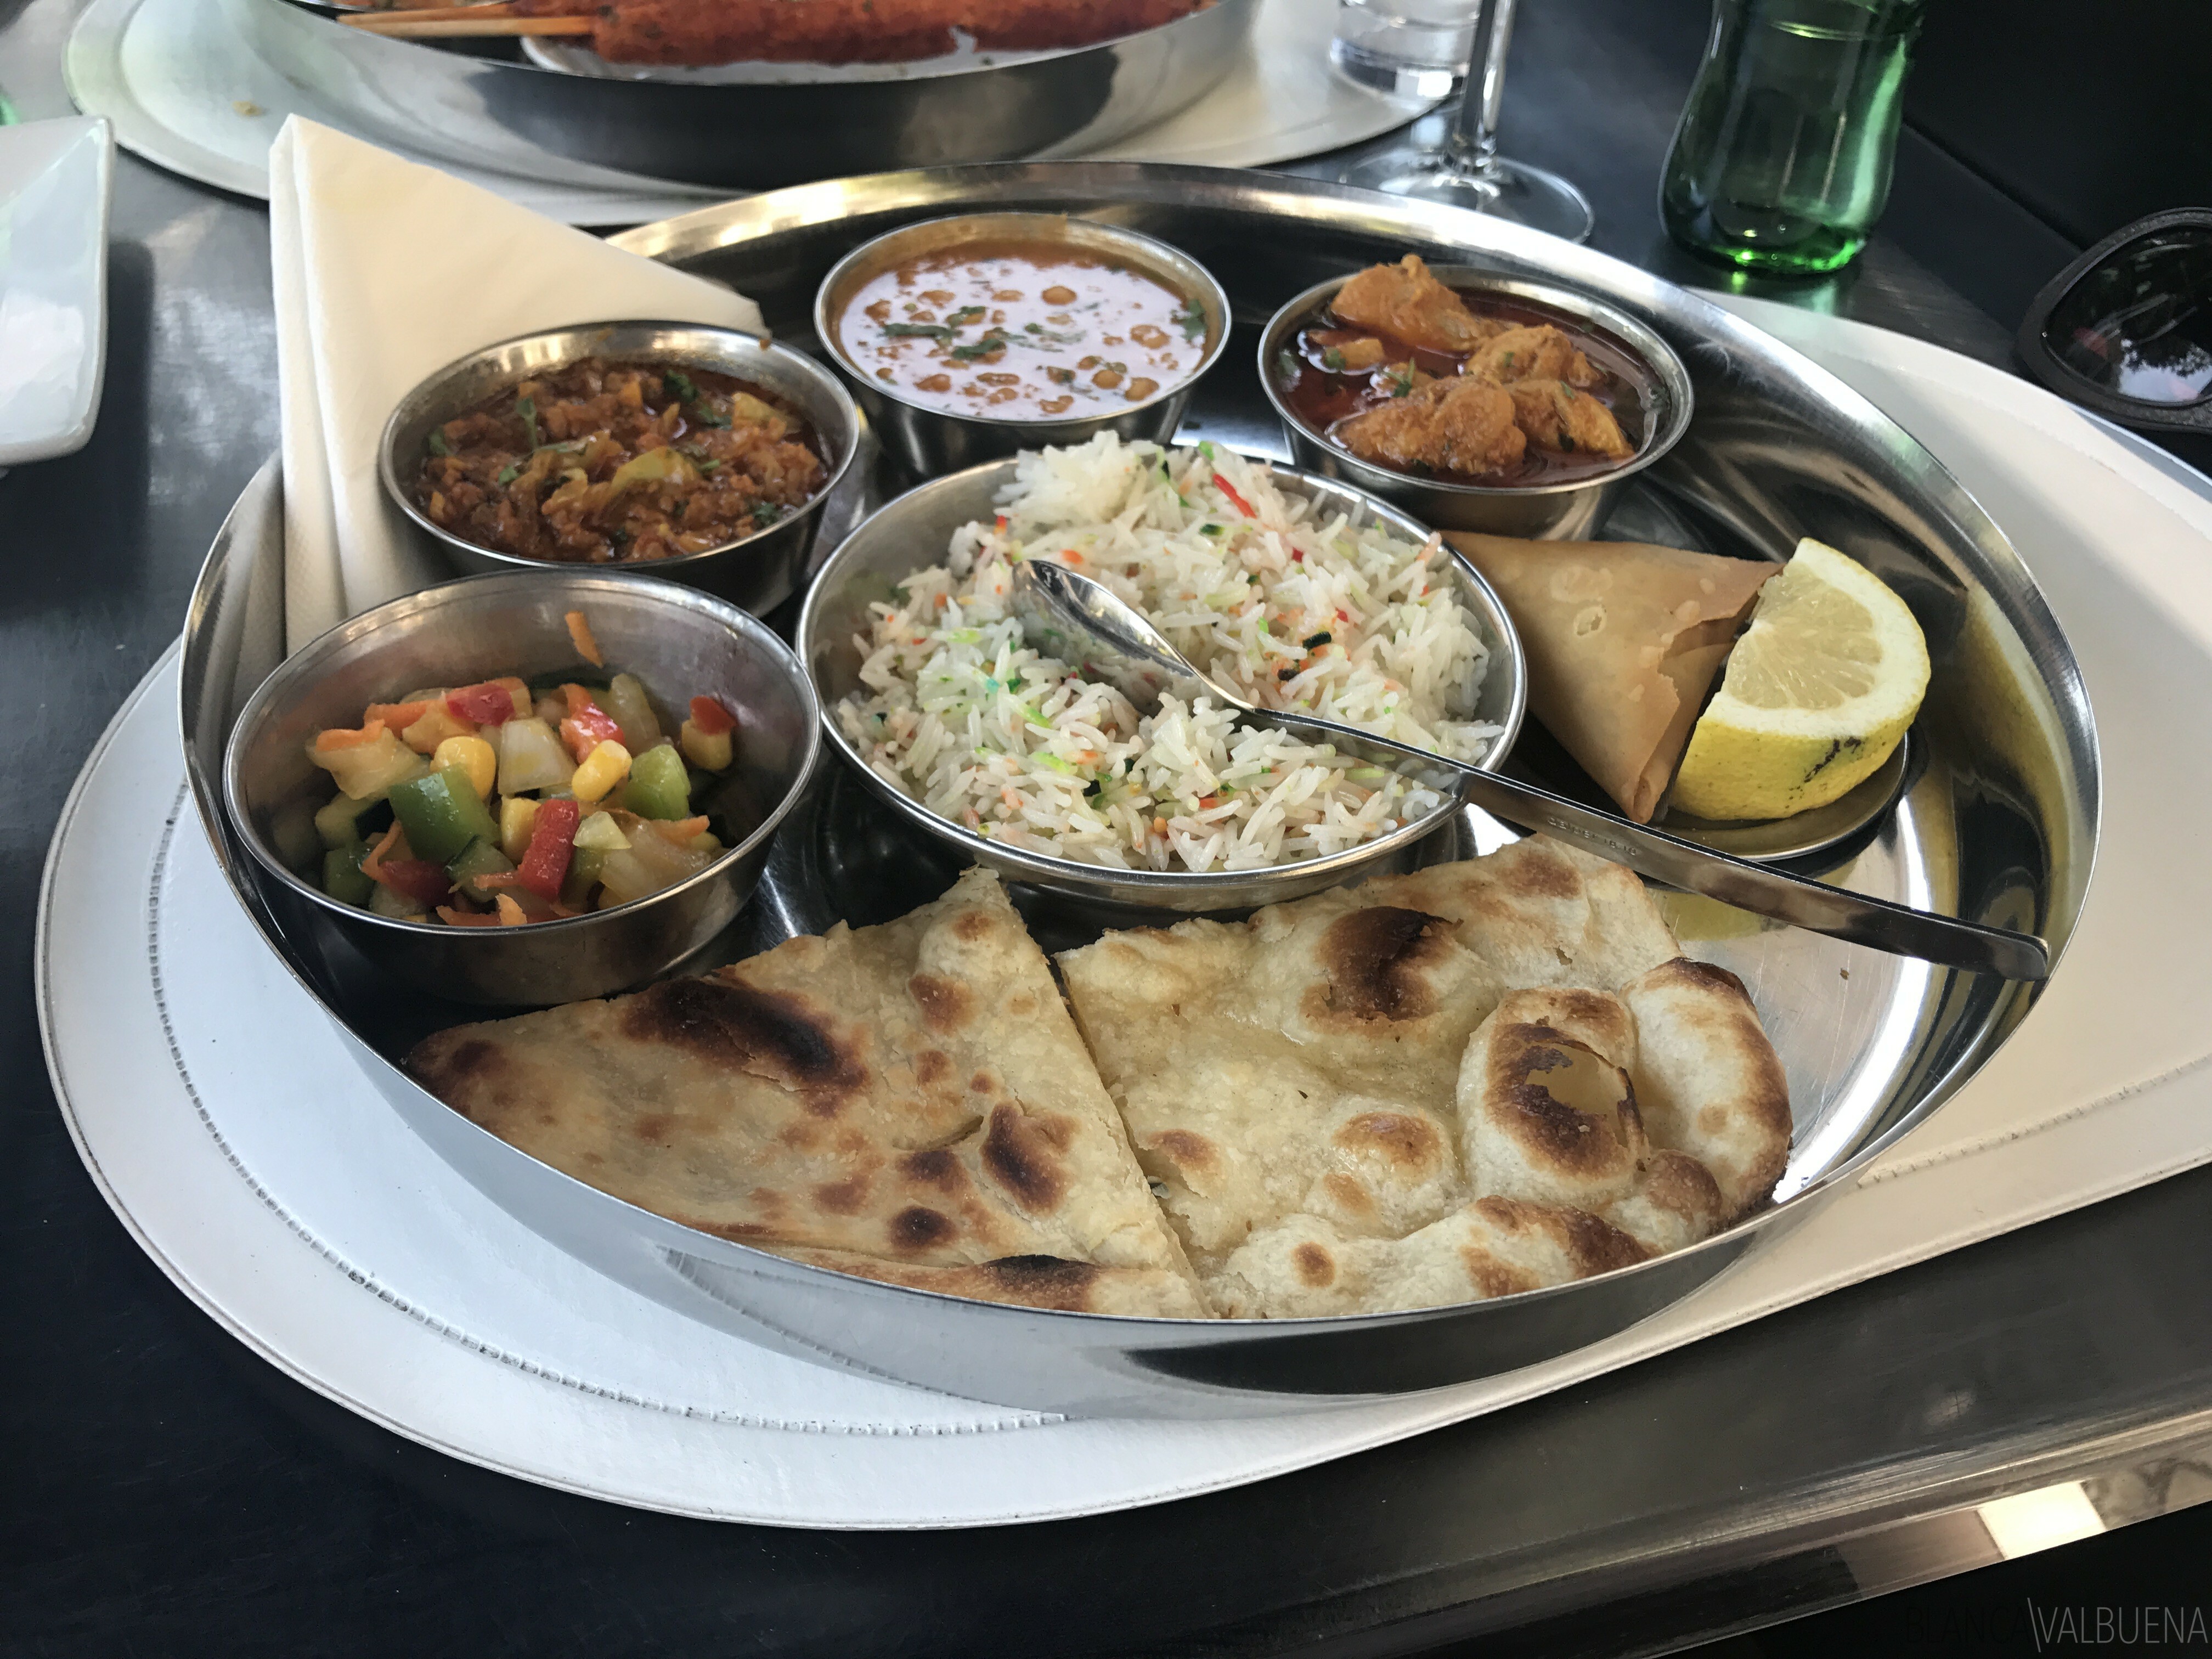 Zaafran offers great Indian food at fair prices in Lisboa